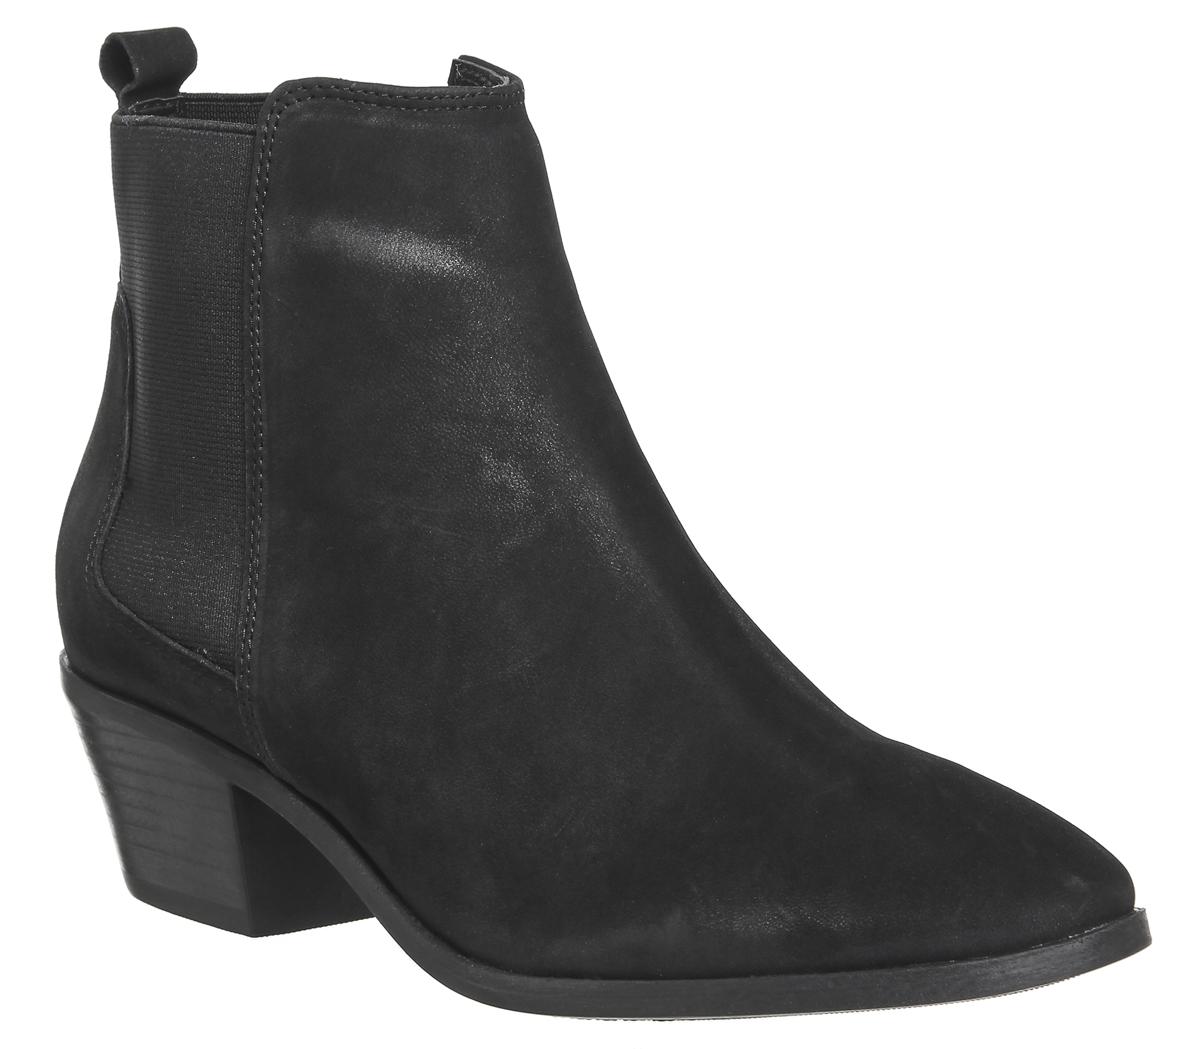 Office Animate Chelsea Boots Black Nubuck - Ankle Boots